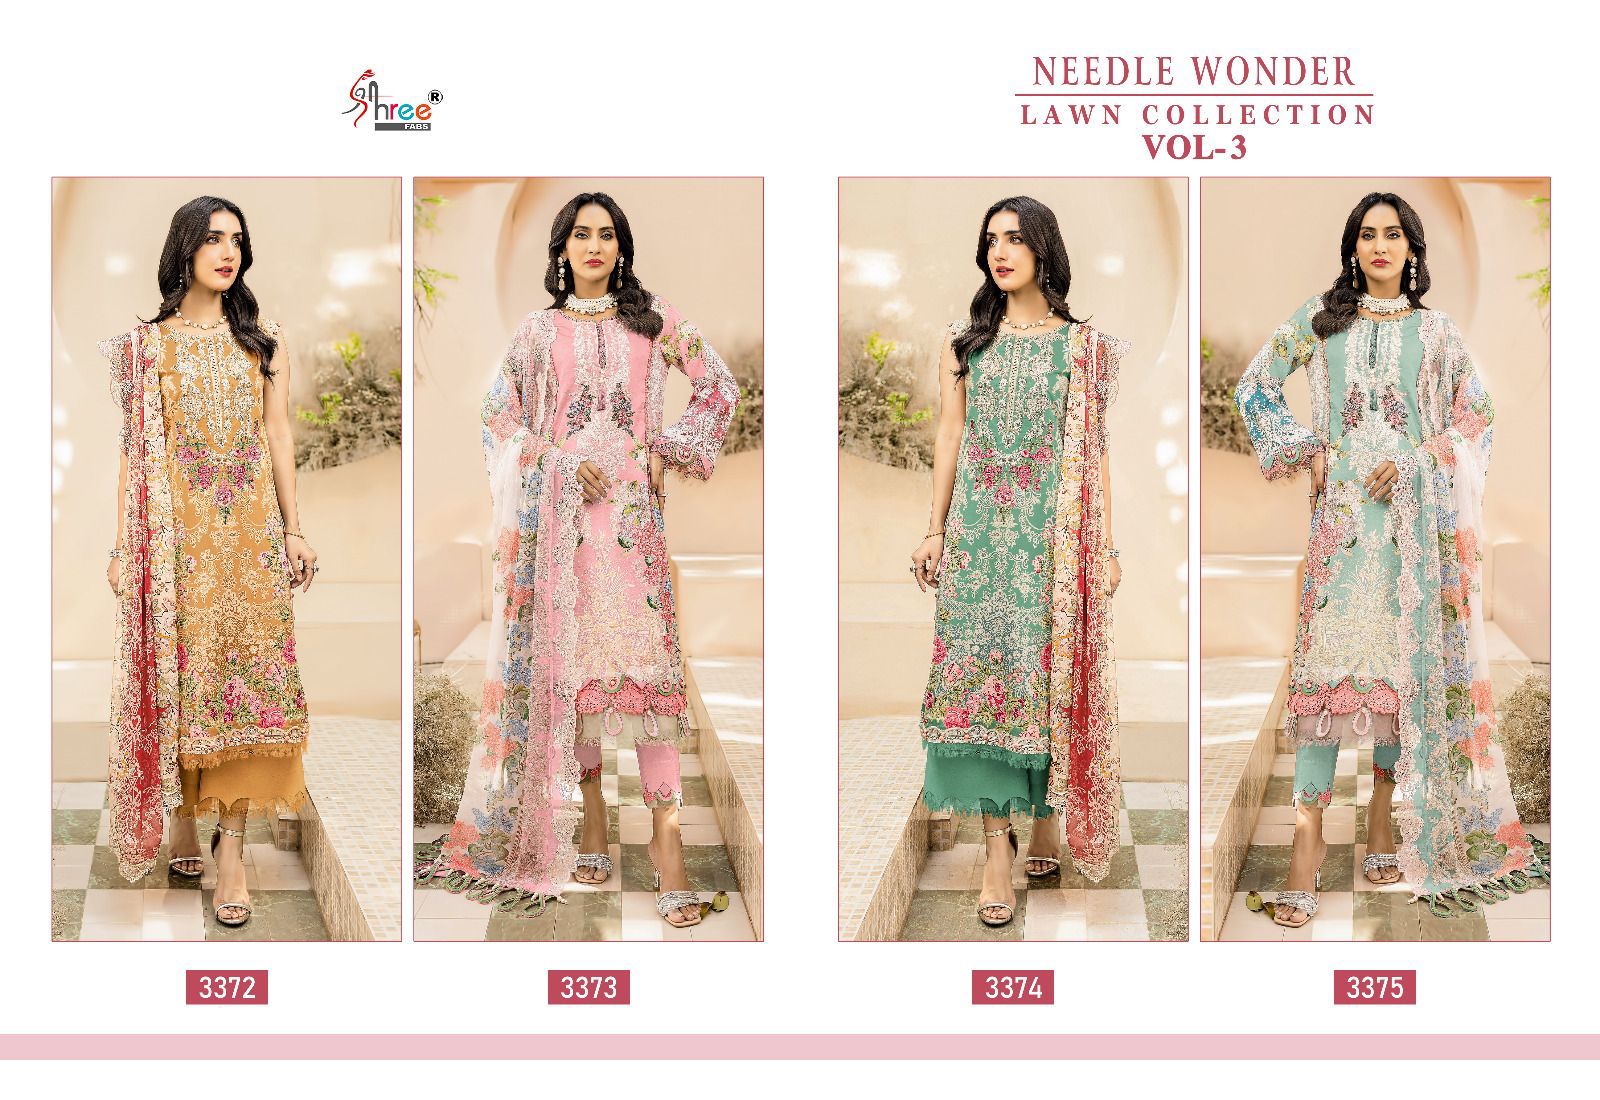 Shree Fabs Needle Wonder Lawn Collection Vol 3 Cotton With Embroidery Work Pakistani Salwar Suit In Surat - jilaniwholesalesuit